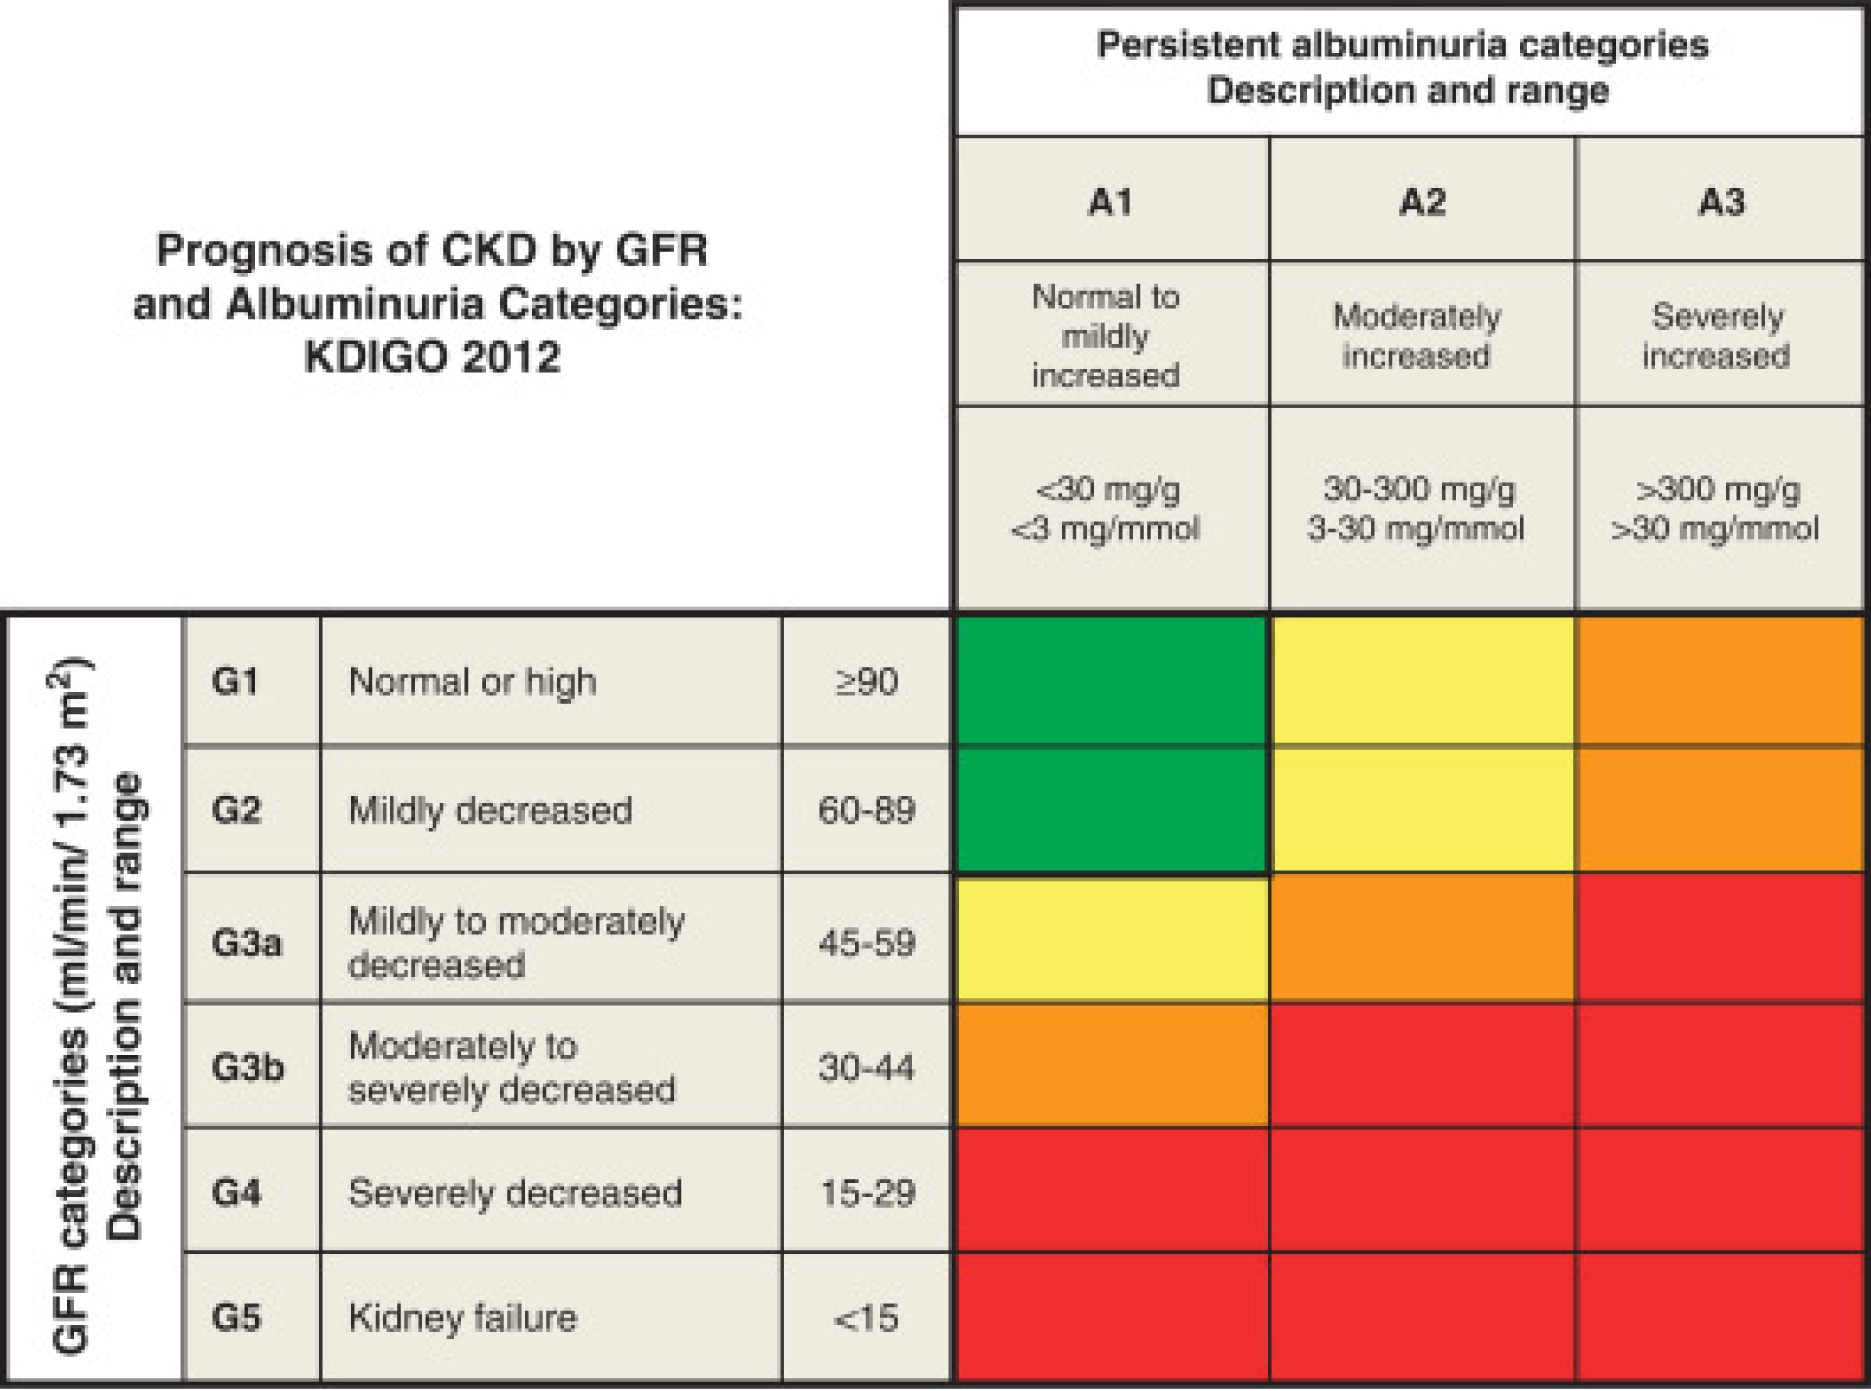 Management Considerations for Acute Coronary Syndromes in Chronic Kidney Disease